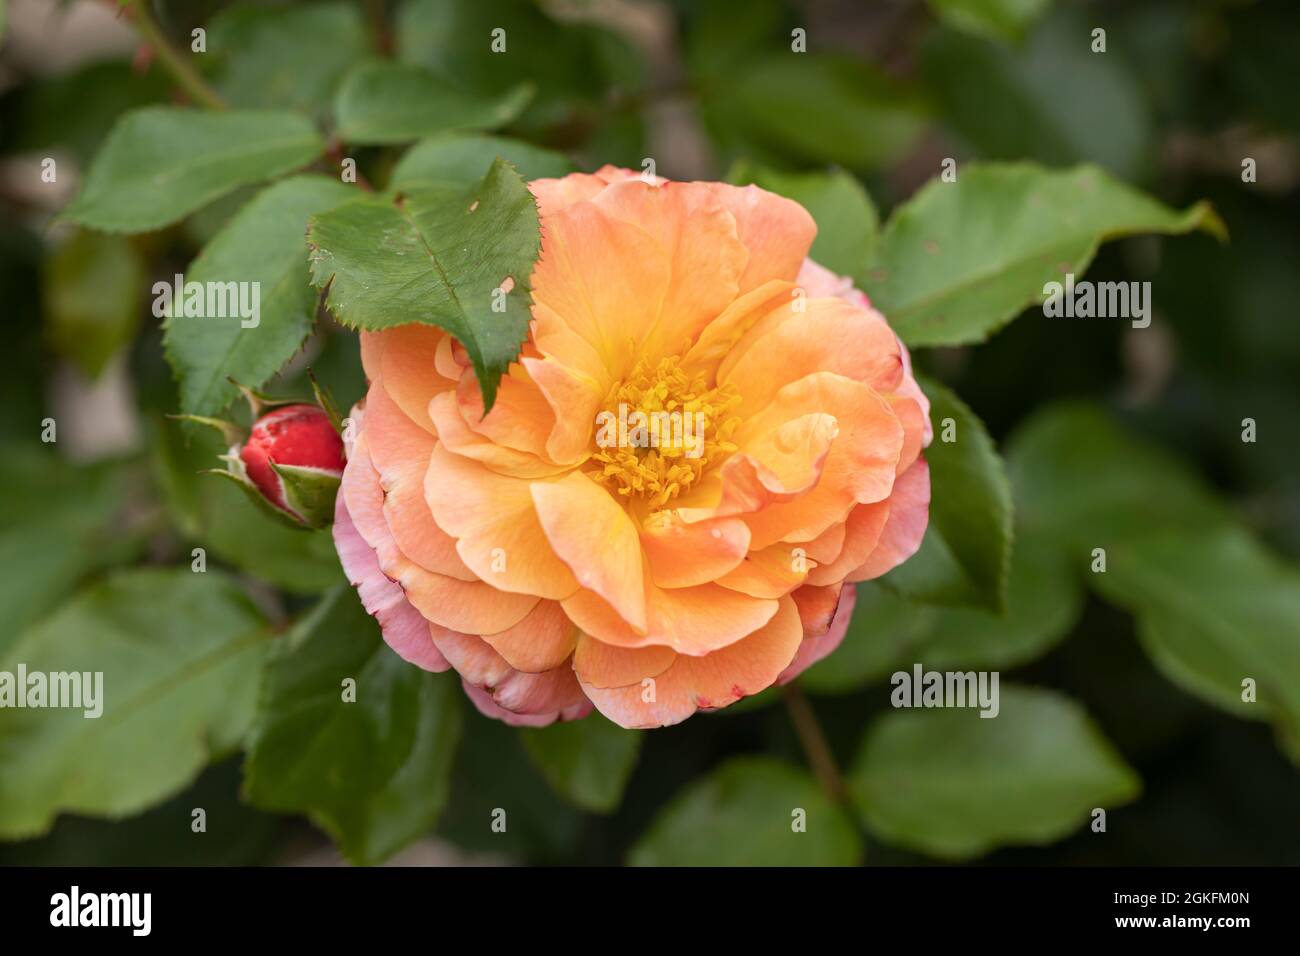 Close up of a beautiful rose with pink / orange petals called Rosa Marie Curie. A floribunda rose flowering in the UK Stock Photo